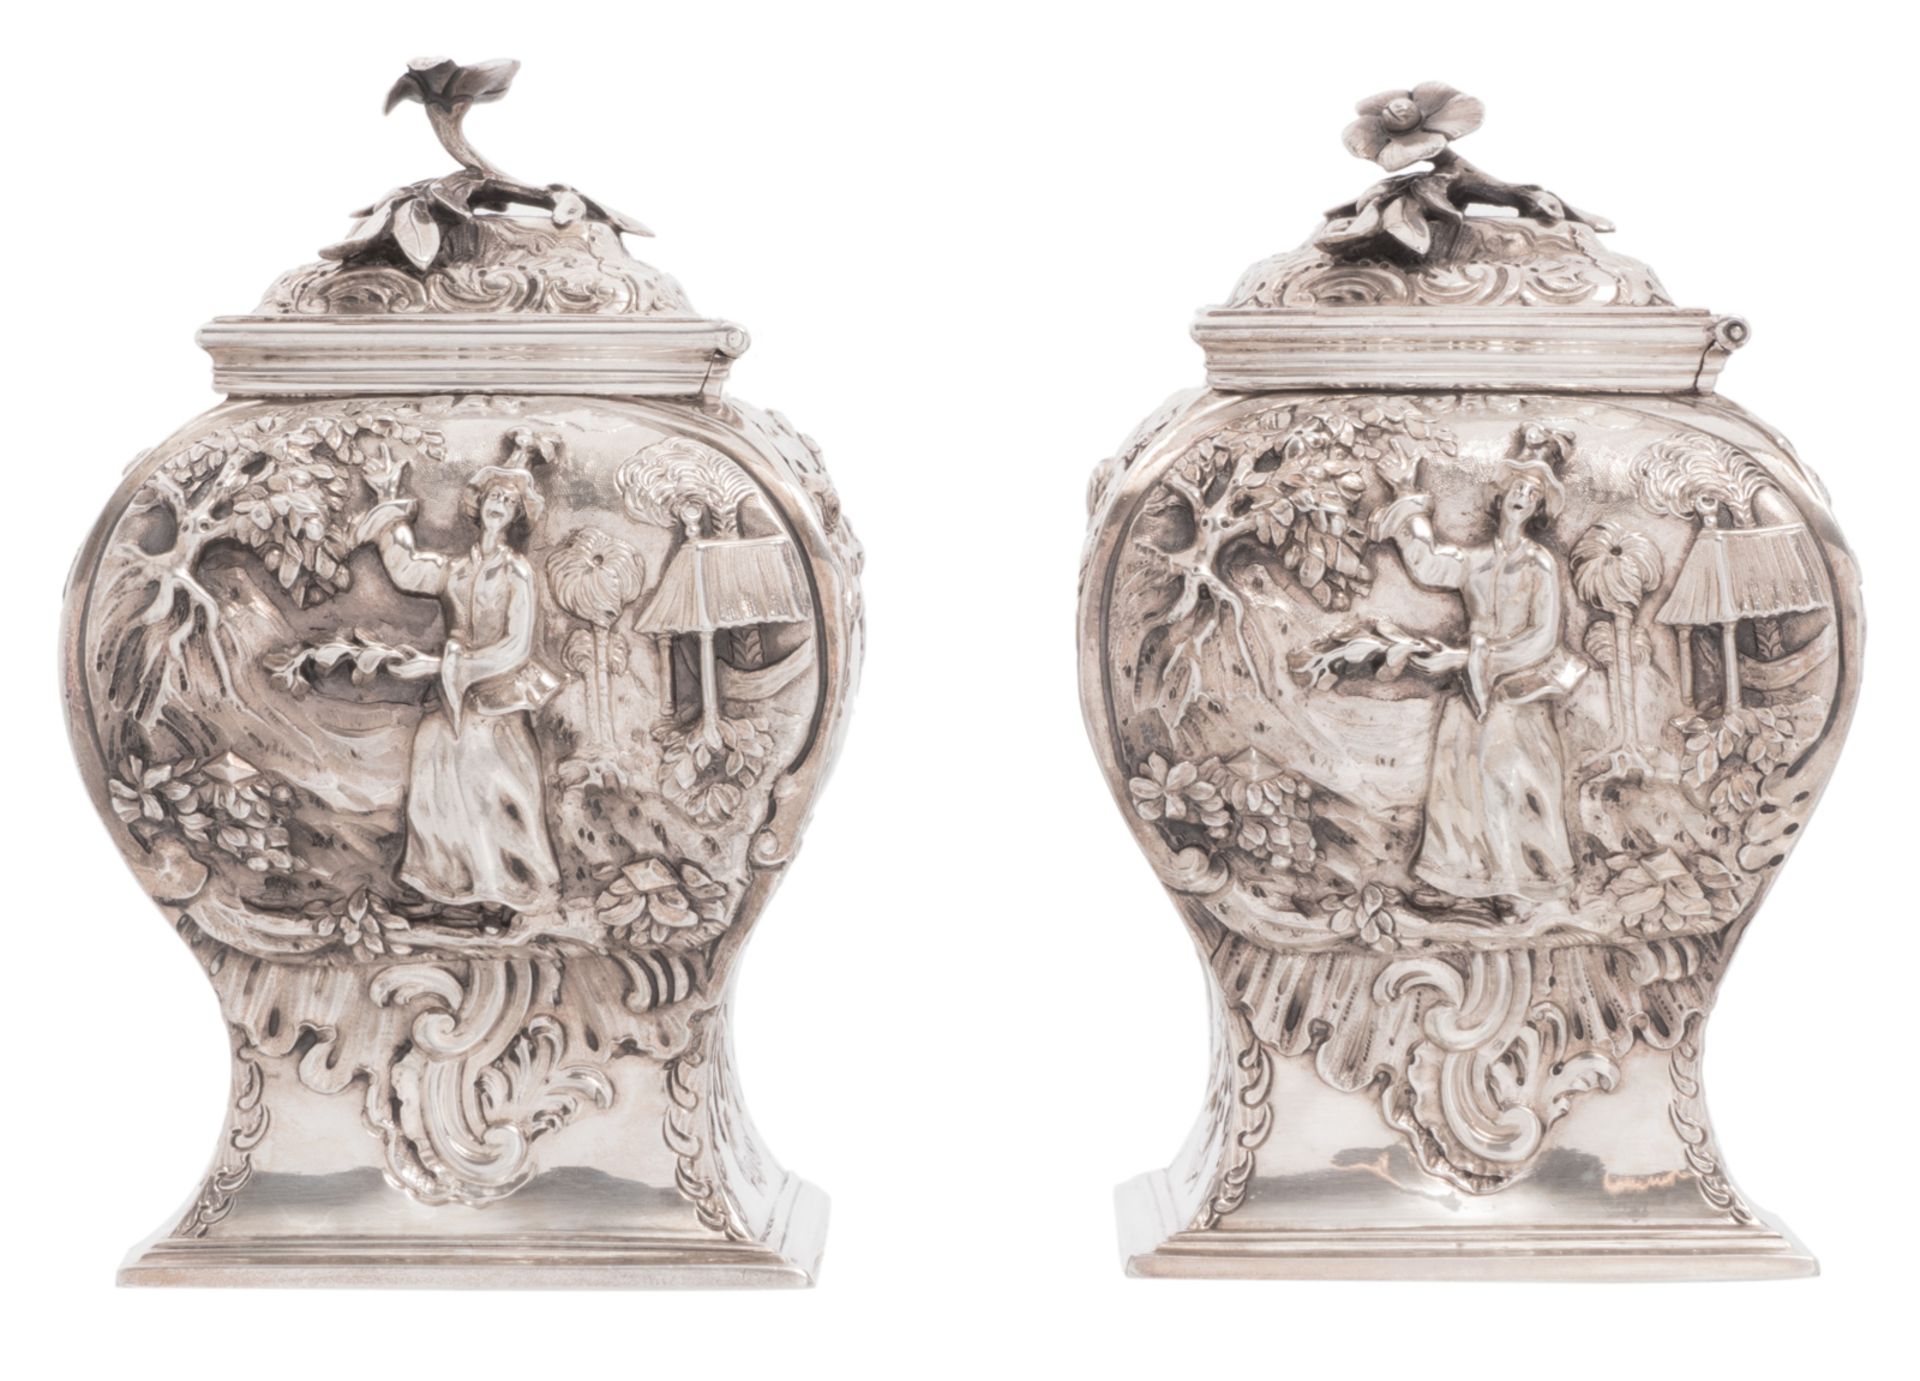 A pair of George II sterling silver chinoiserie decorated tea caddies, London hallmark, date